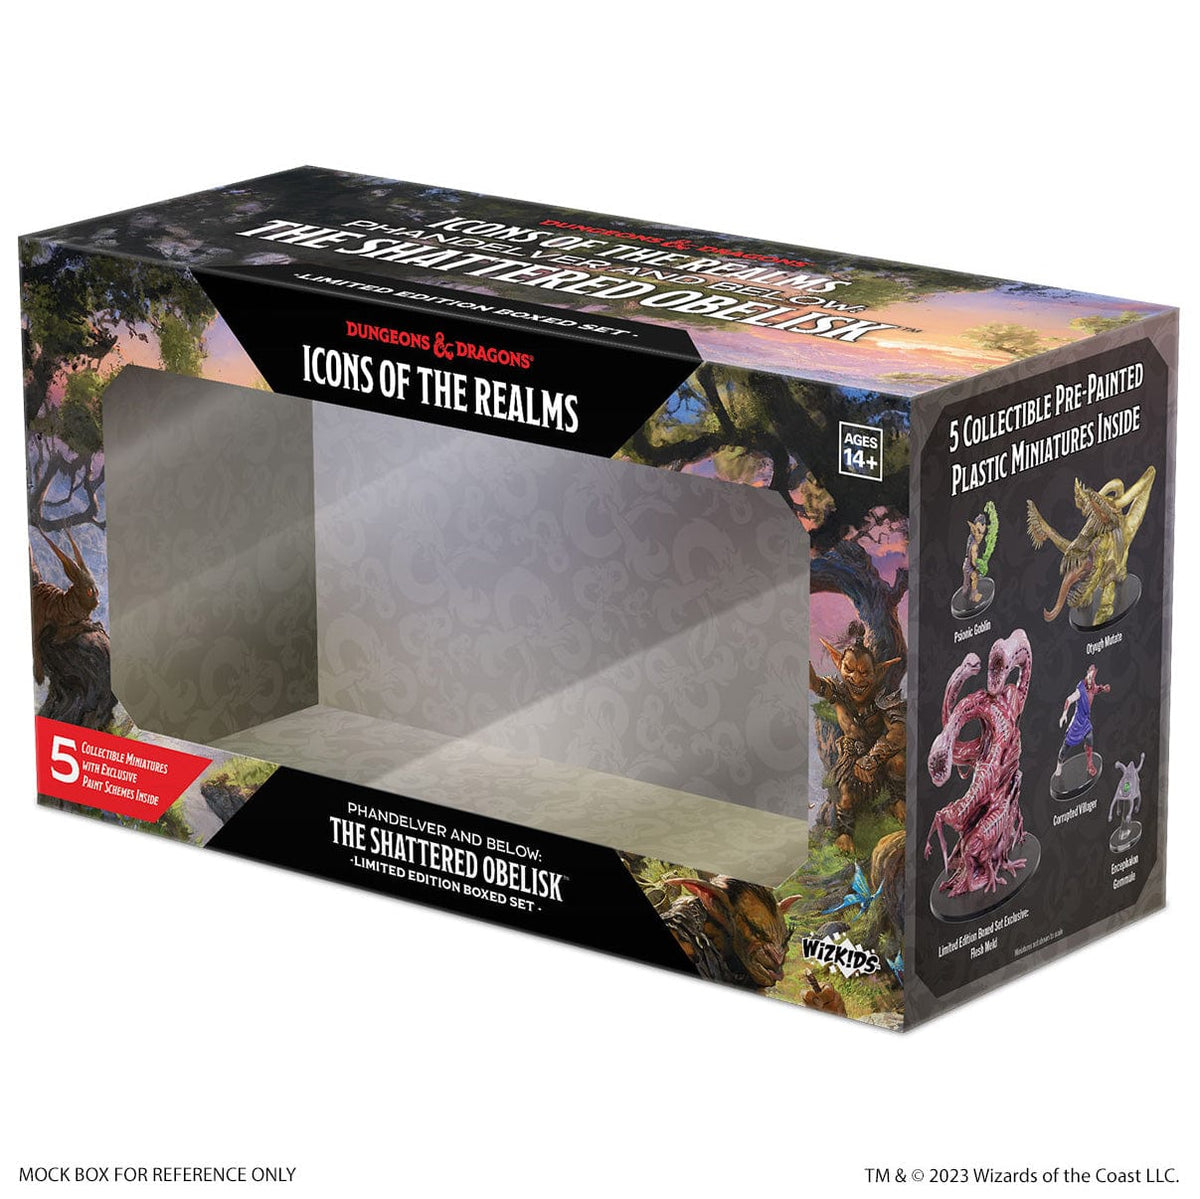 Dungeons & Dragons: Icons of the Realms - The Shattered Obelisk (Phandelver and Below, Limited Edition Boxed Set)